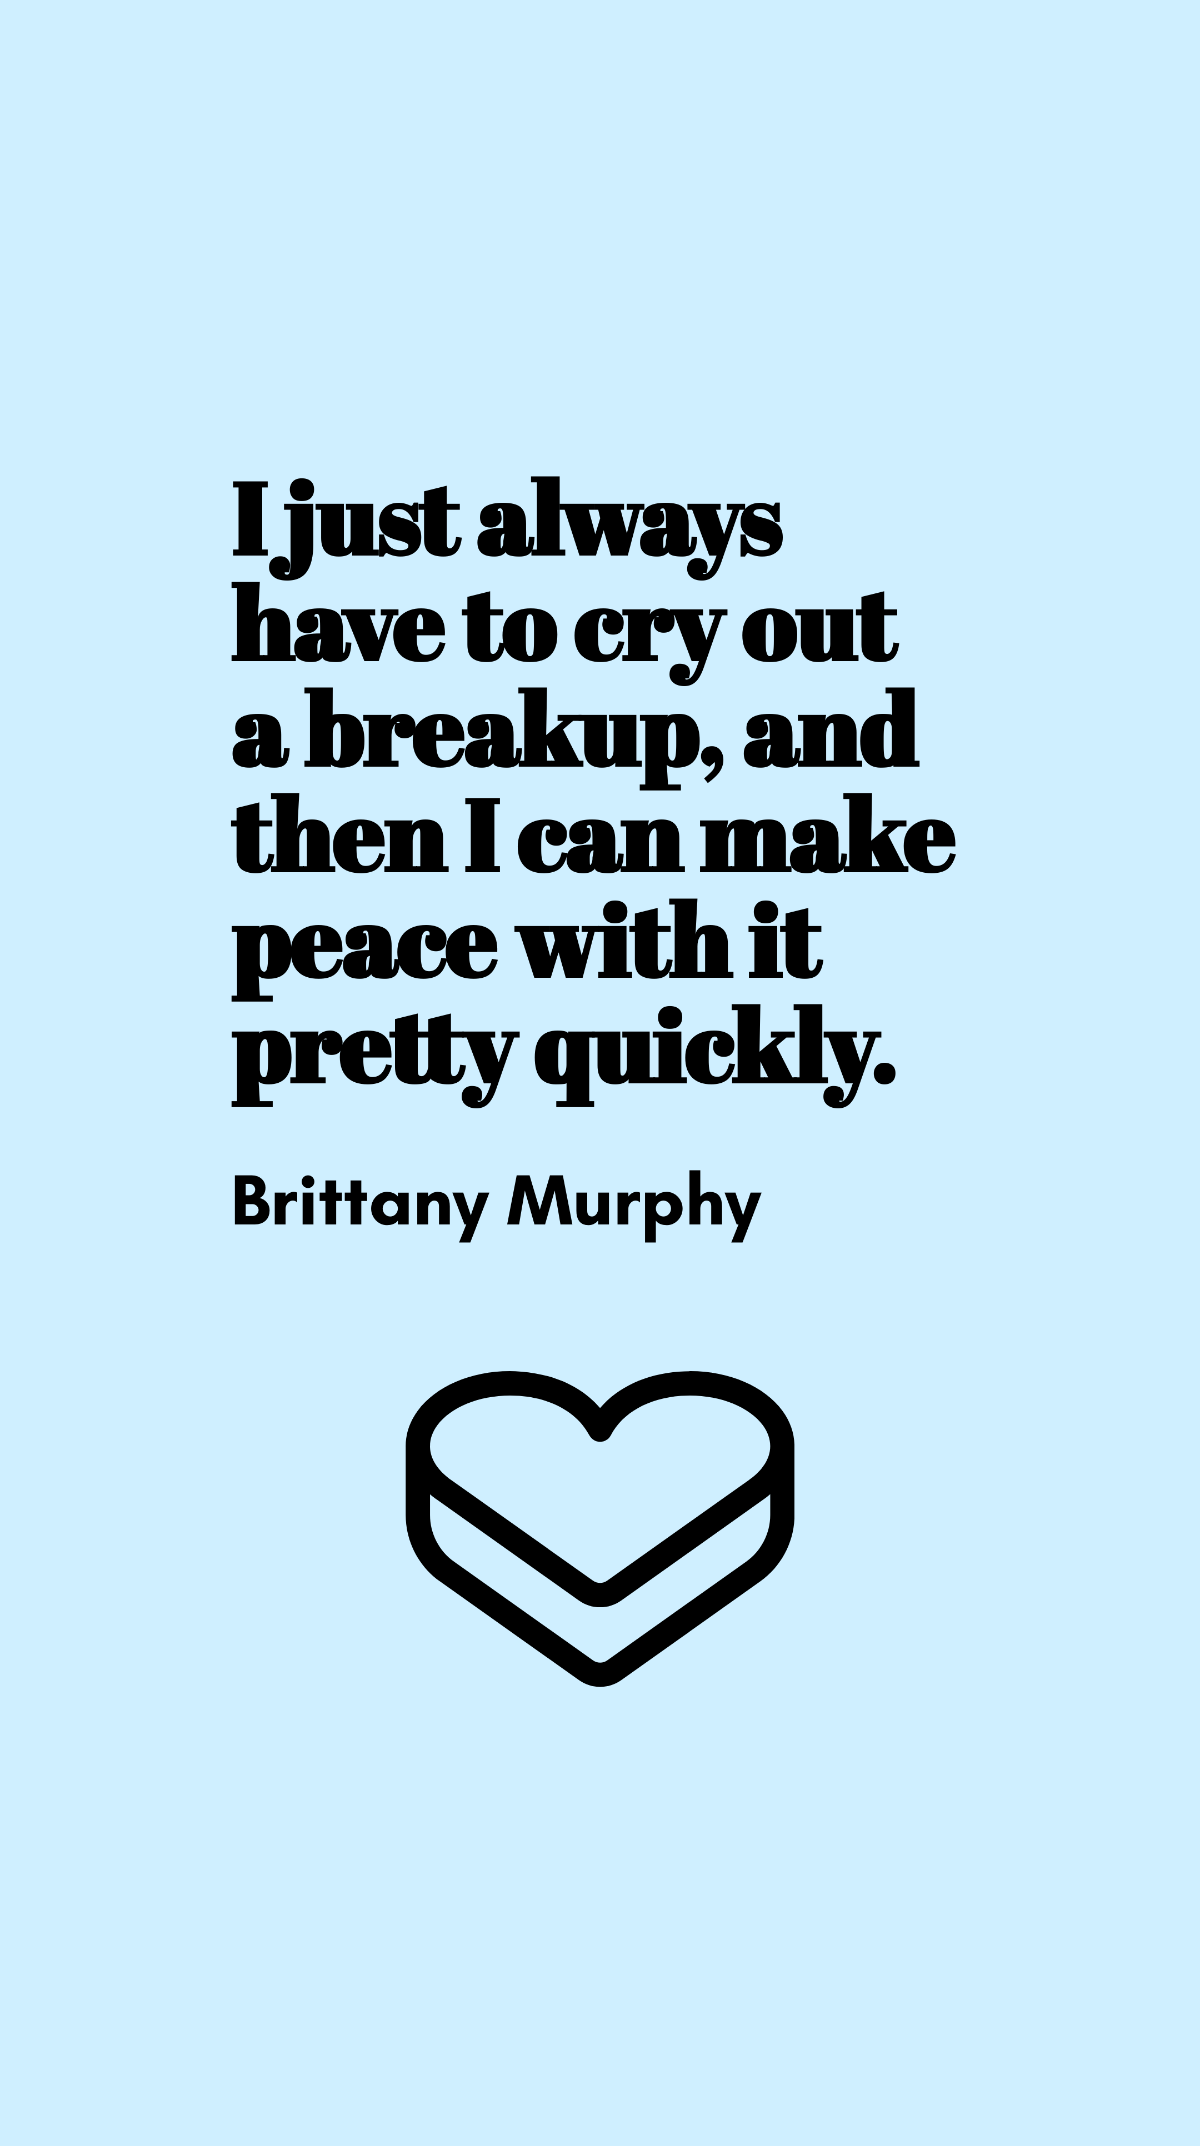 Brittany Murphy - I just always have to cry out a breakup, and then I can make peace with it pretty quickly. Template